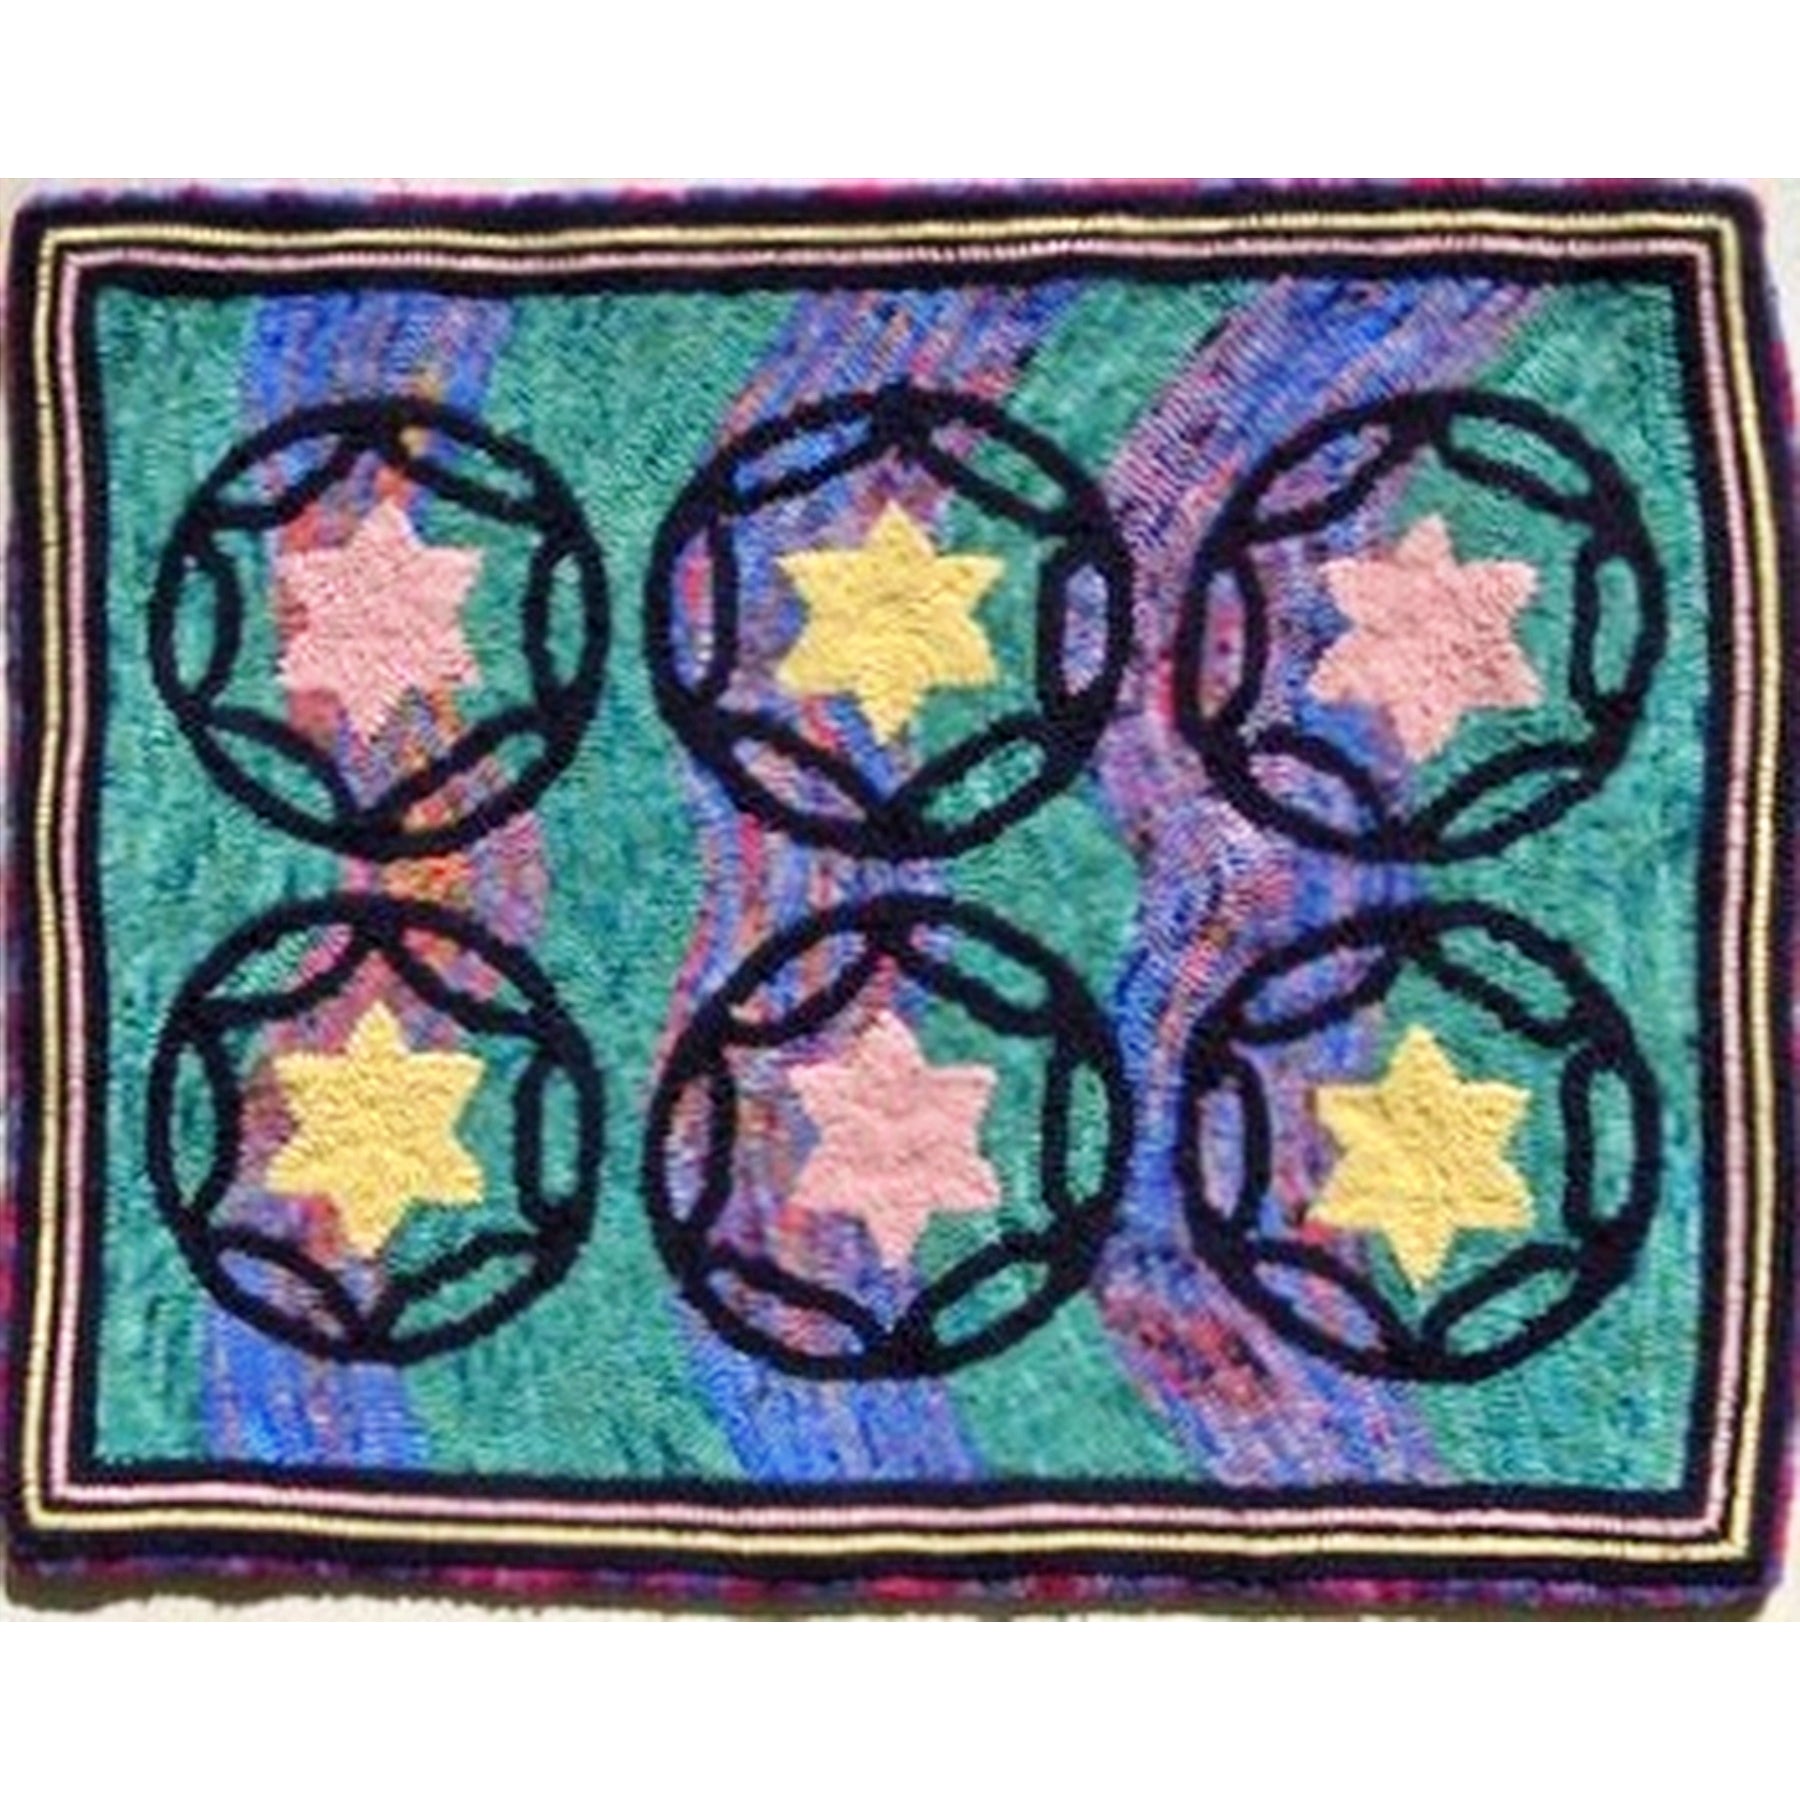 Star In A Circle, rug hooked by Karen Maddox